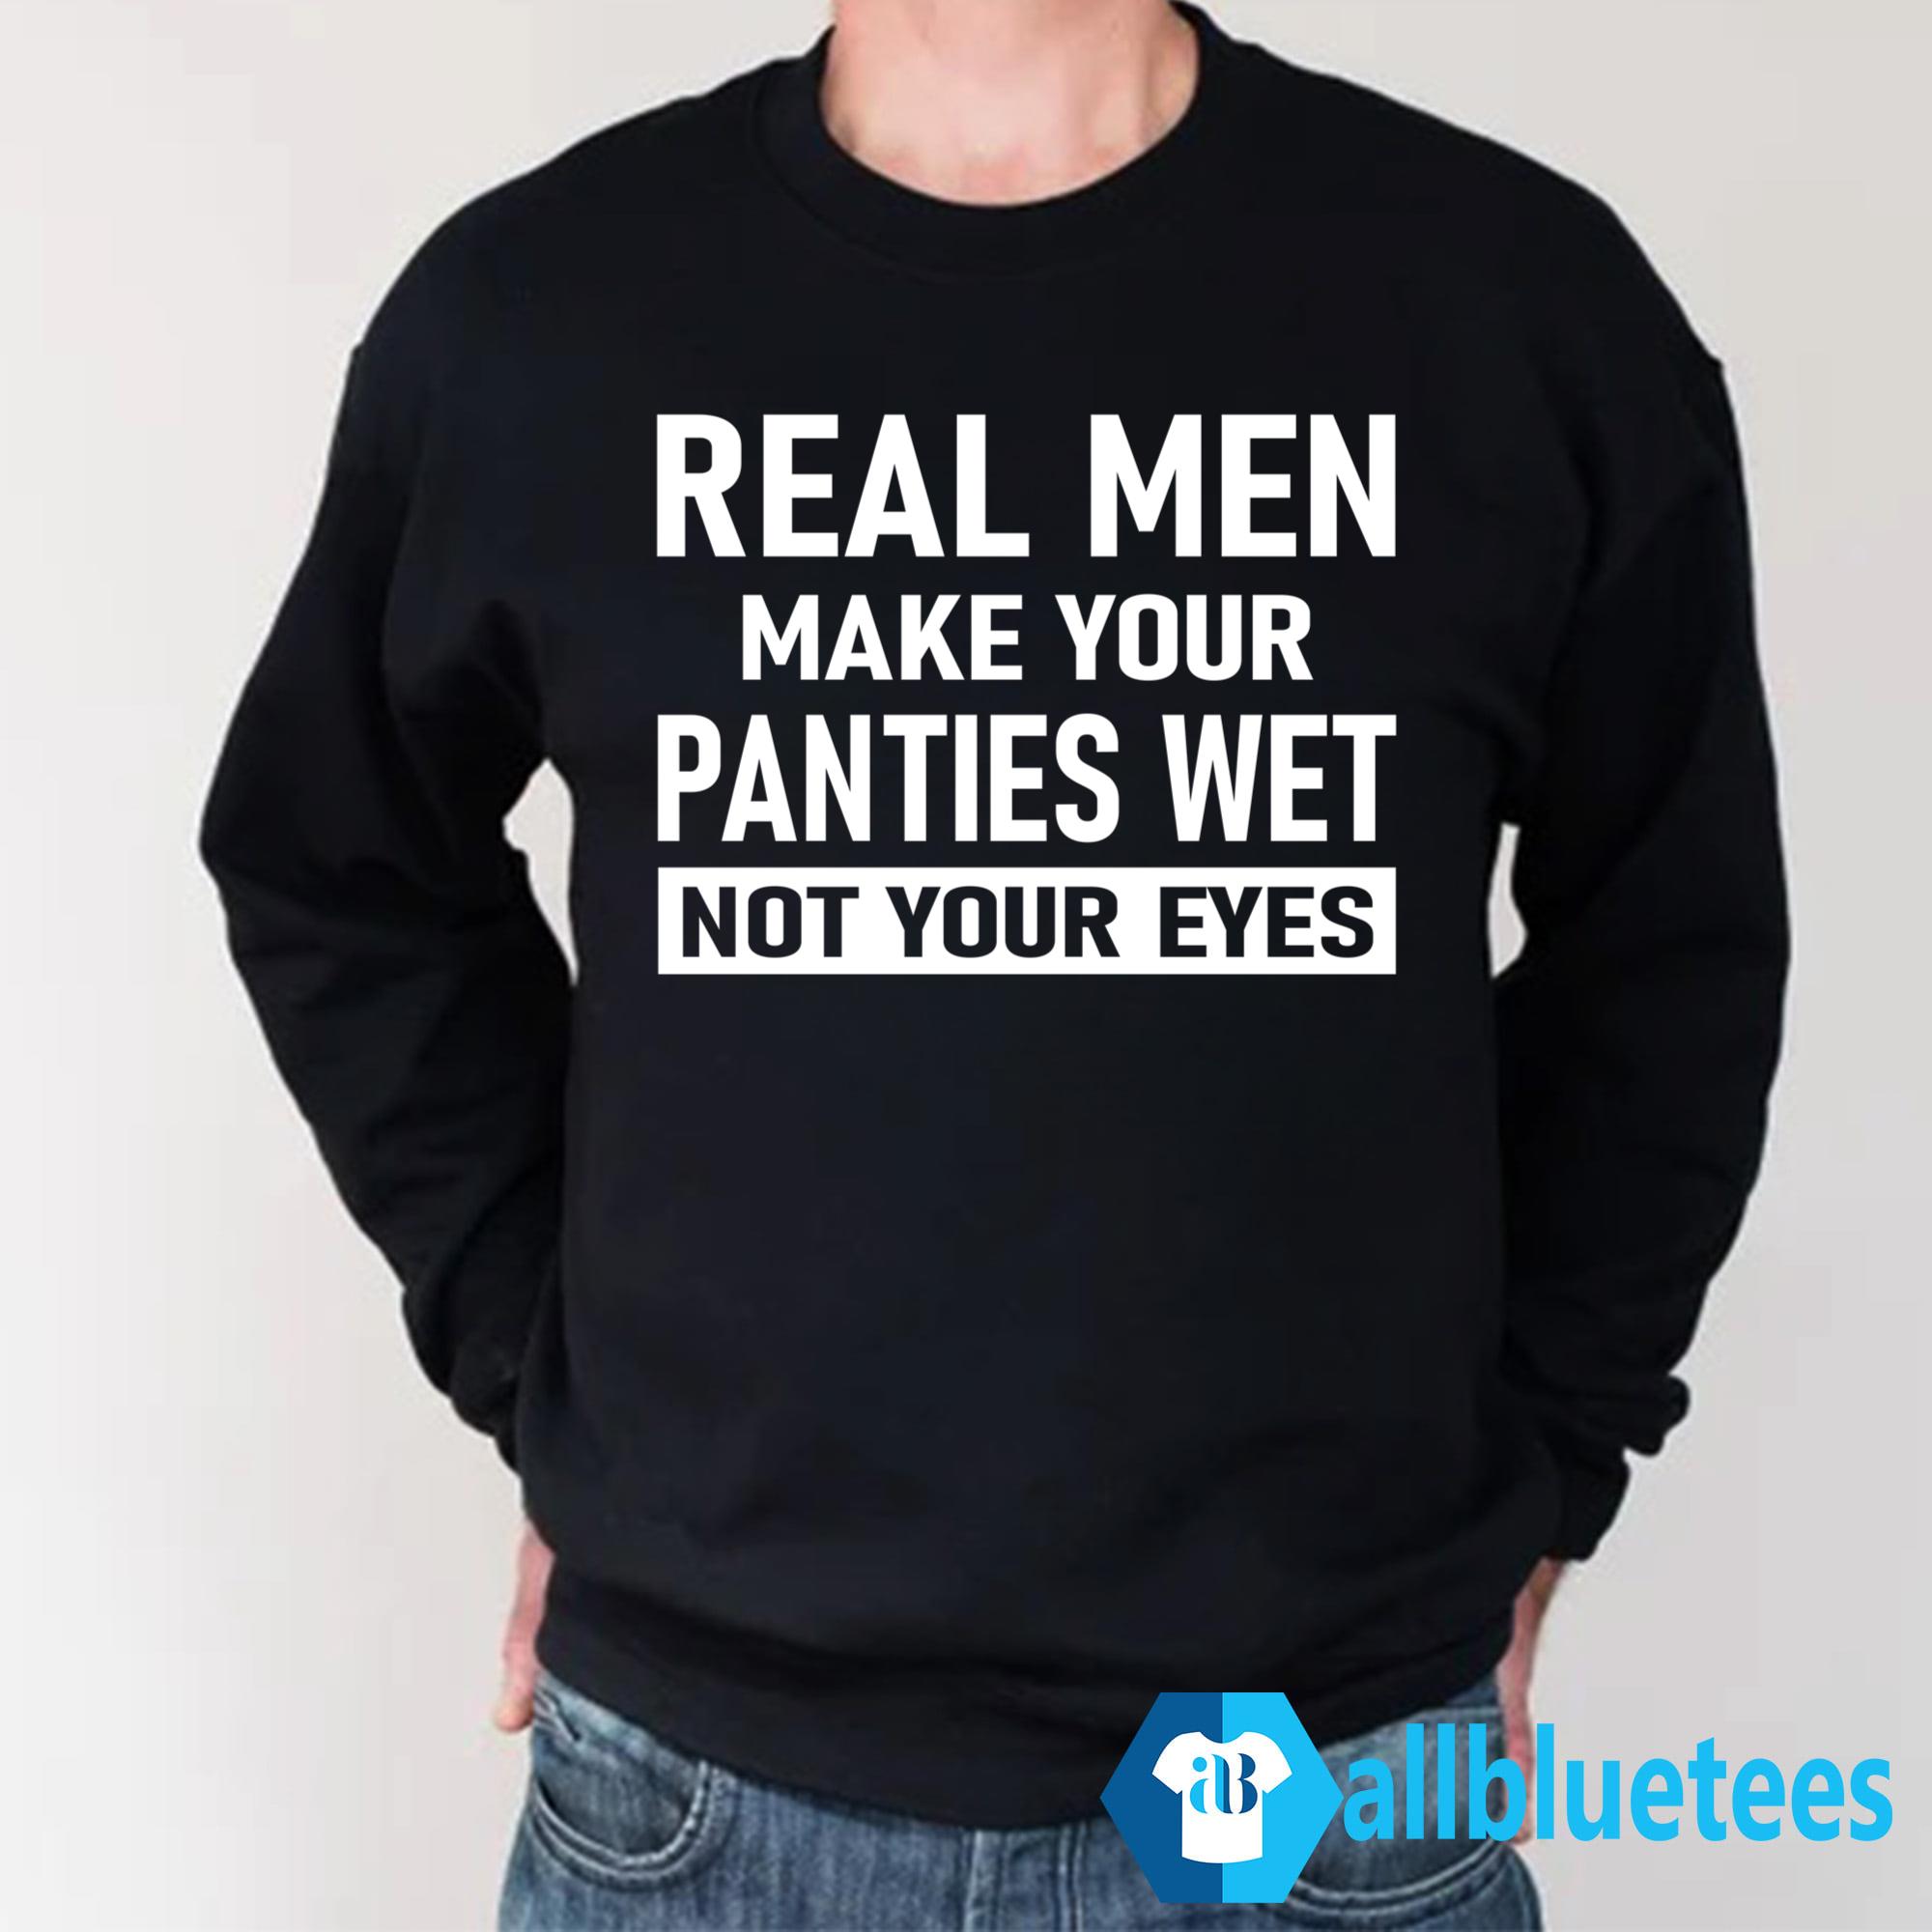 Real Men Make Your Panties Wet Not Your Eyes Funny Women's V-Neck T-Shirt